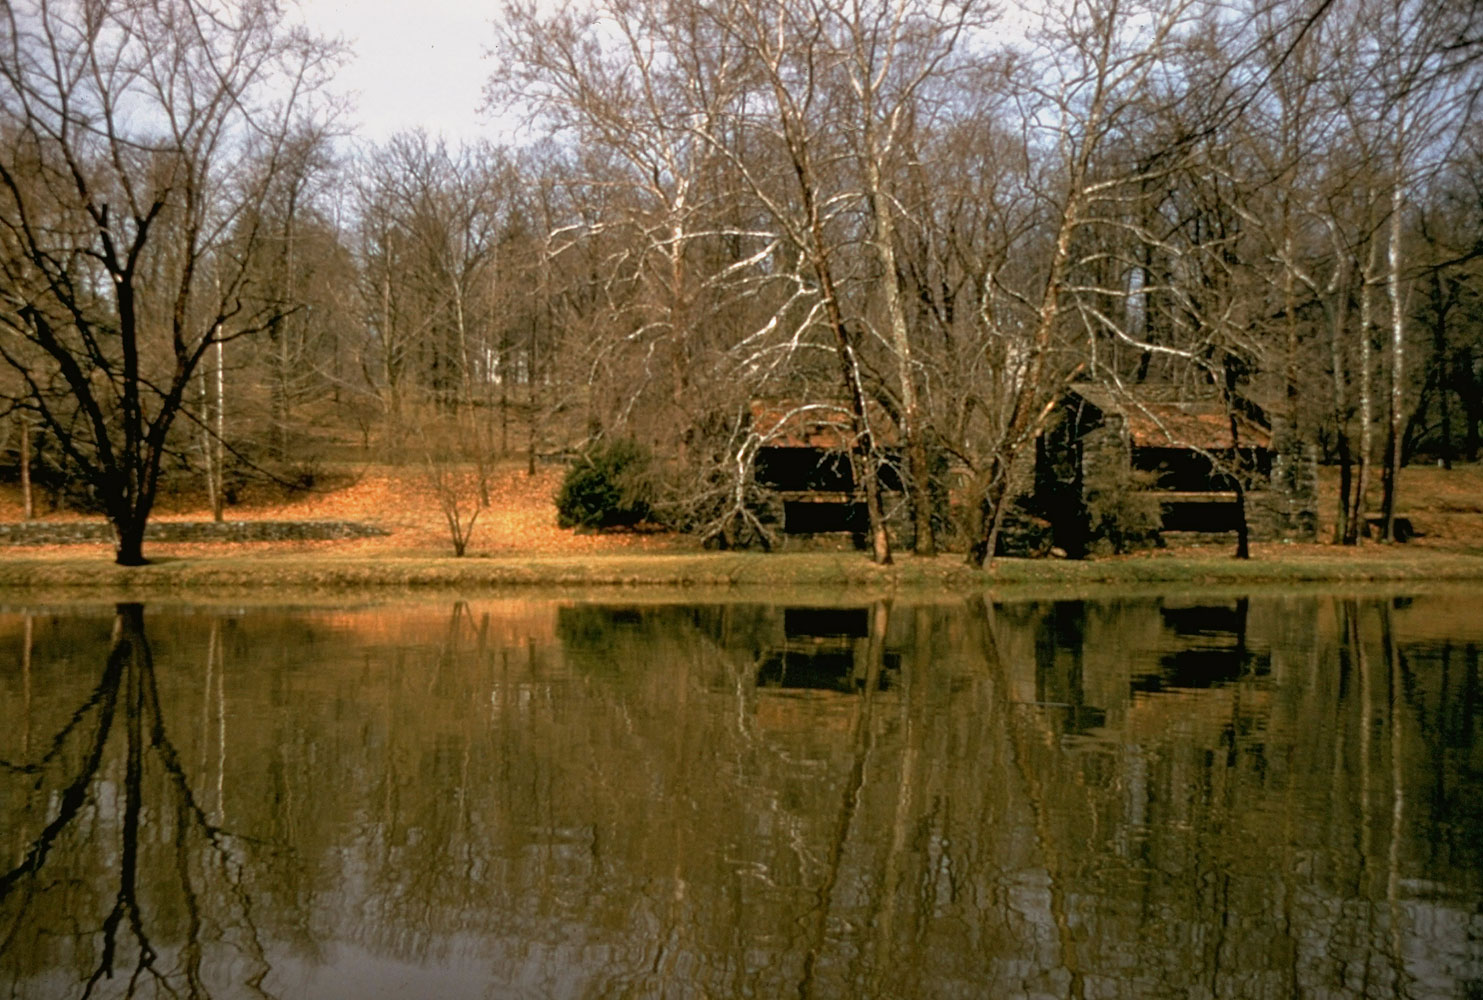 The First State National Monument (Delaware): This new monument will tell the story of the early Dutch, Swedish, Finnish and English settlement of the colony of Delaware, as well as Delaware's role as the first state to ratify the Constitution. Shown above: Mill buildings standing along Brandywine creek north of Wilmington, Del.